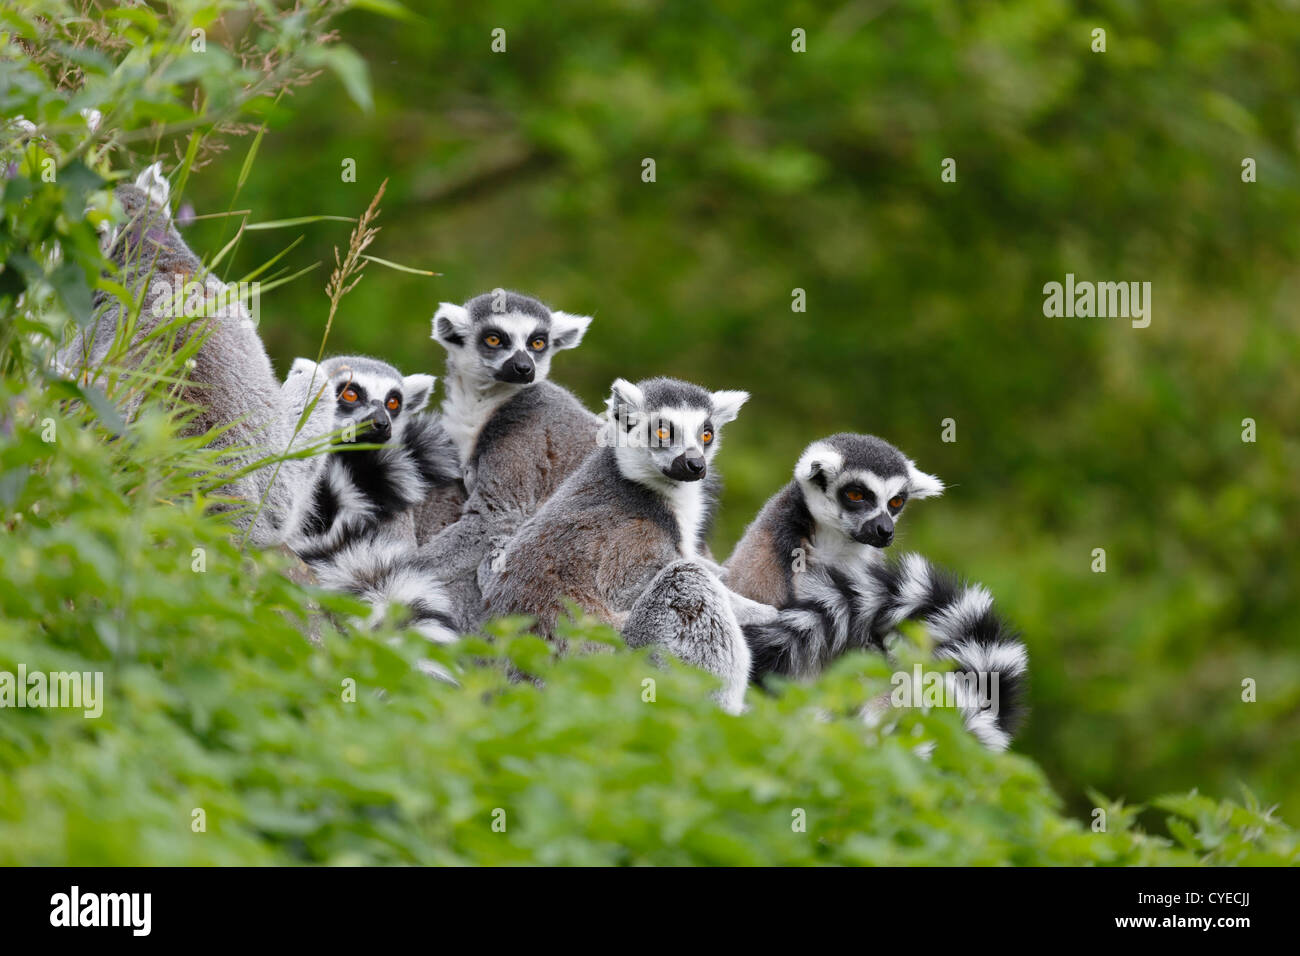 Group of lemurs sit together in natural habitat Stock Photo